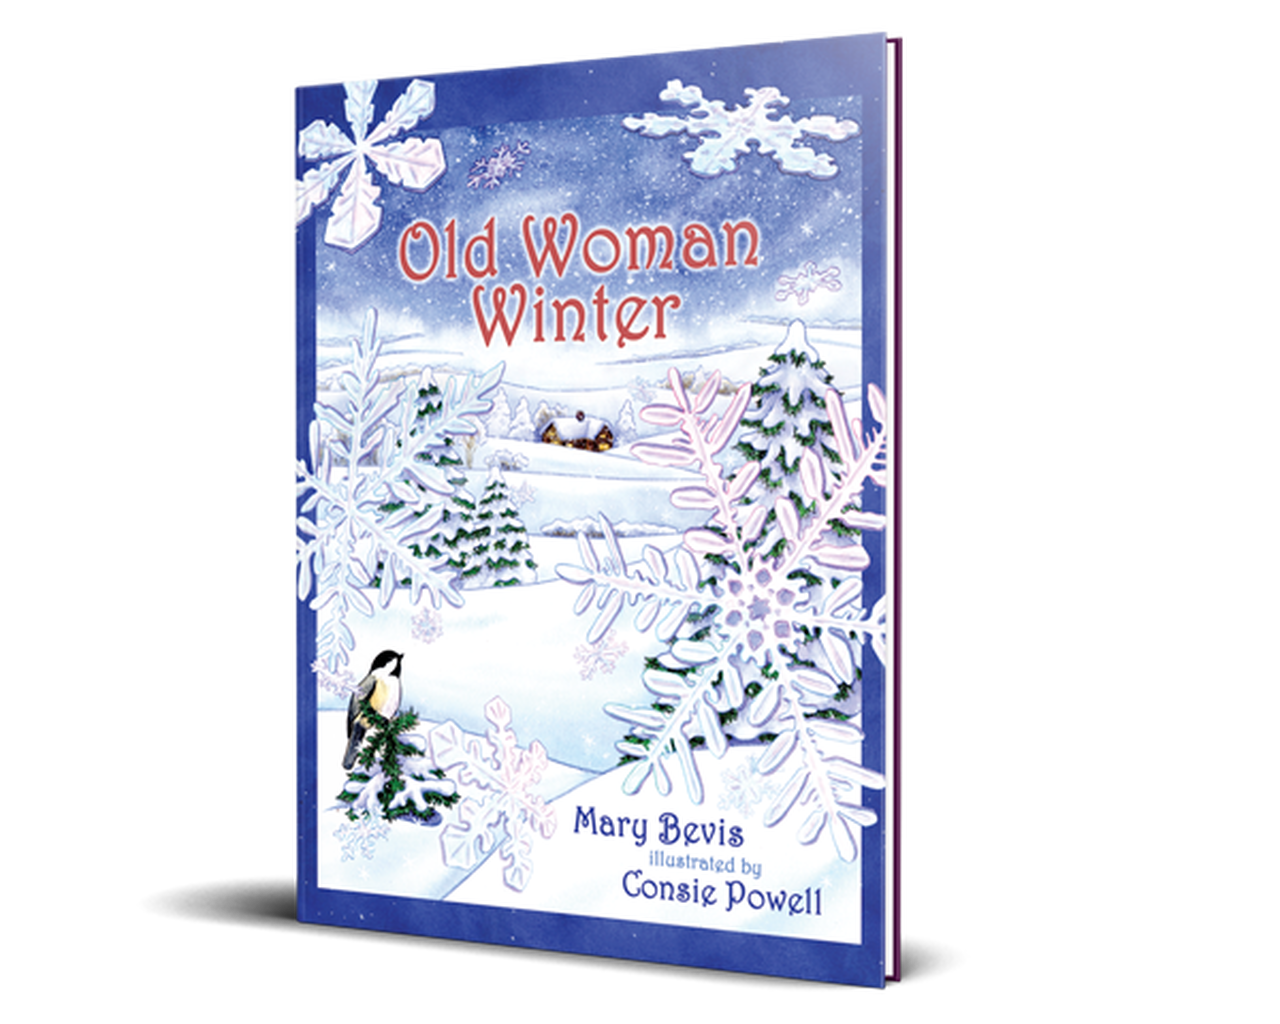 Legacy Bound-Old Woman Winter - Hardcover-LBP2412